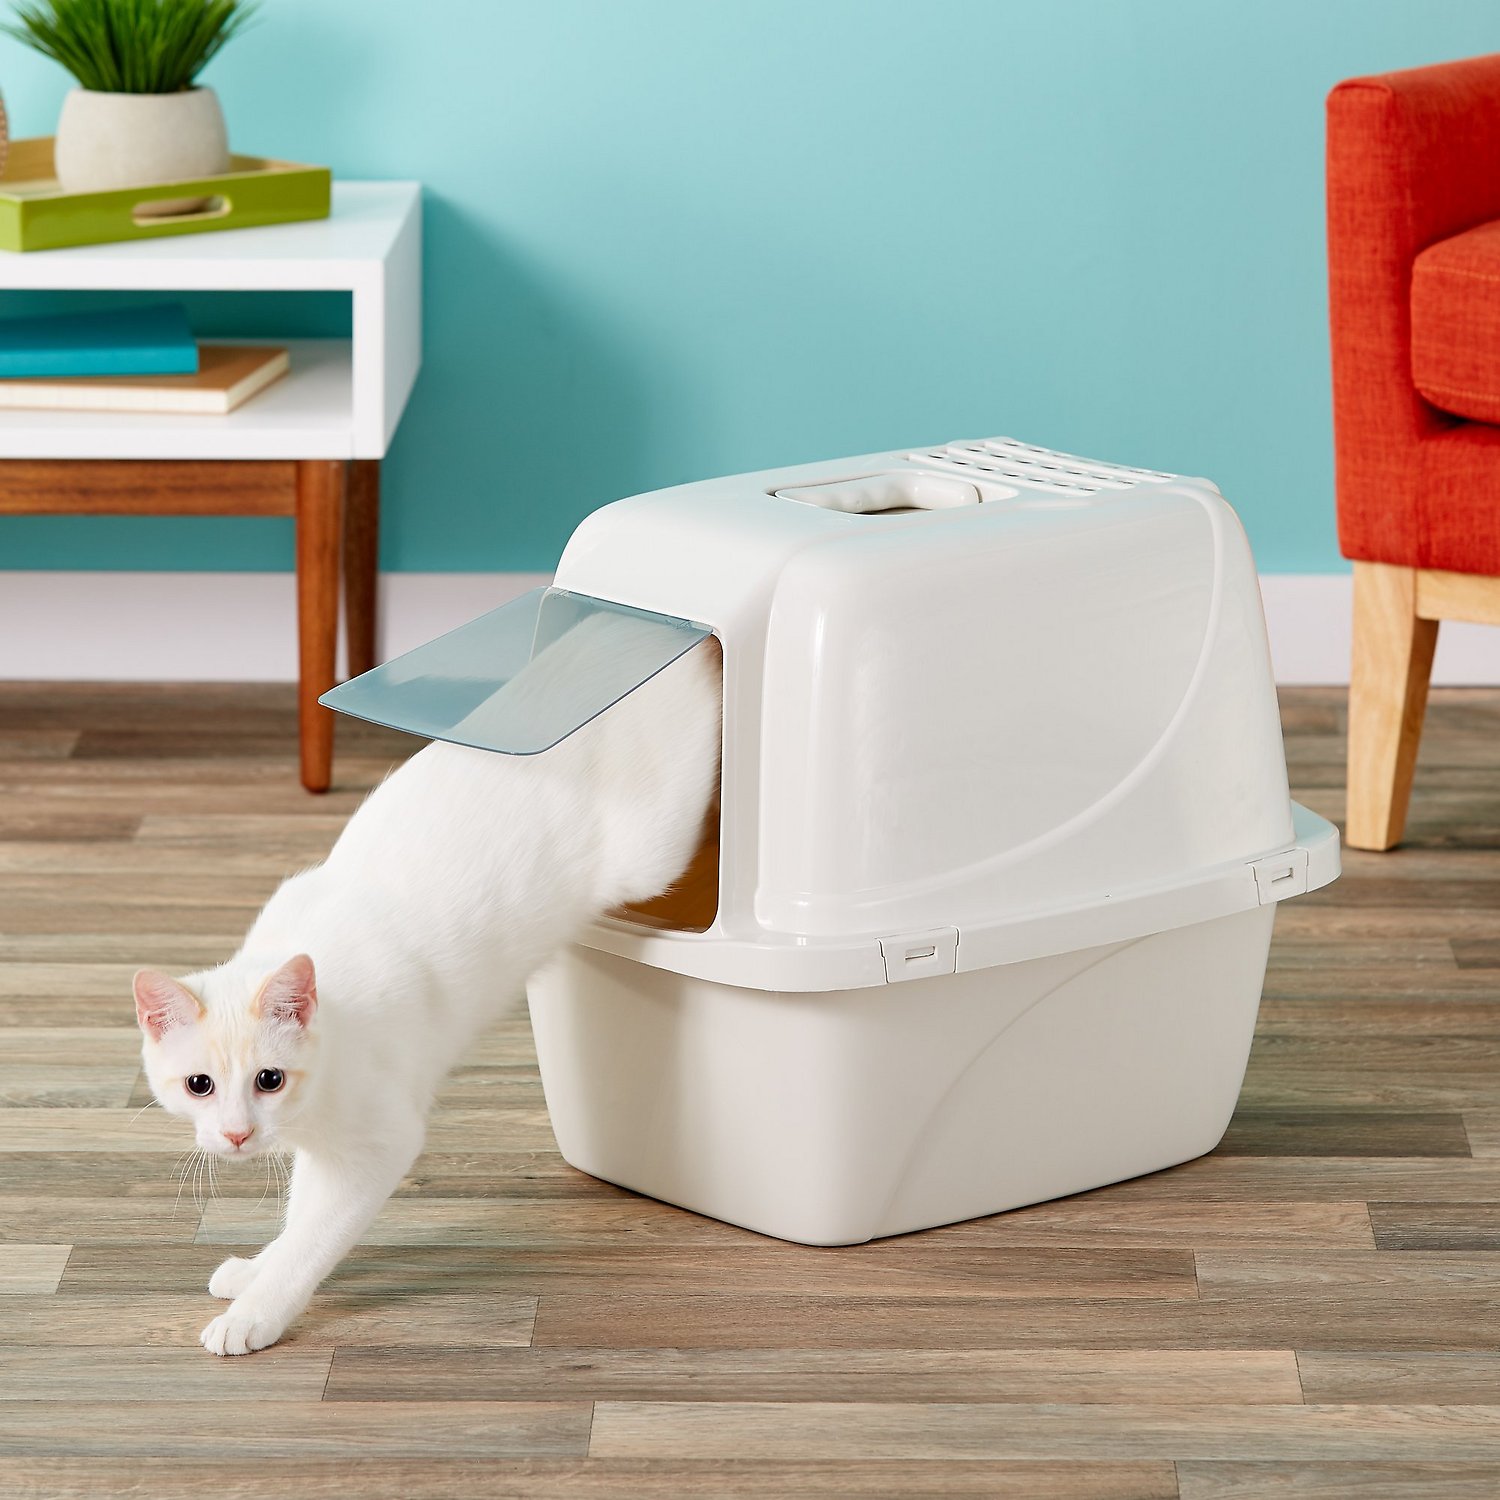 Best 6 Covered Litter Box for Large Cats Reviews & Buying Guides